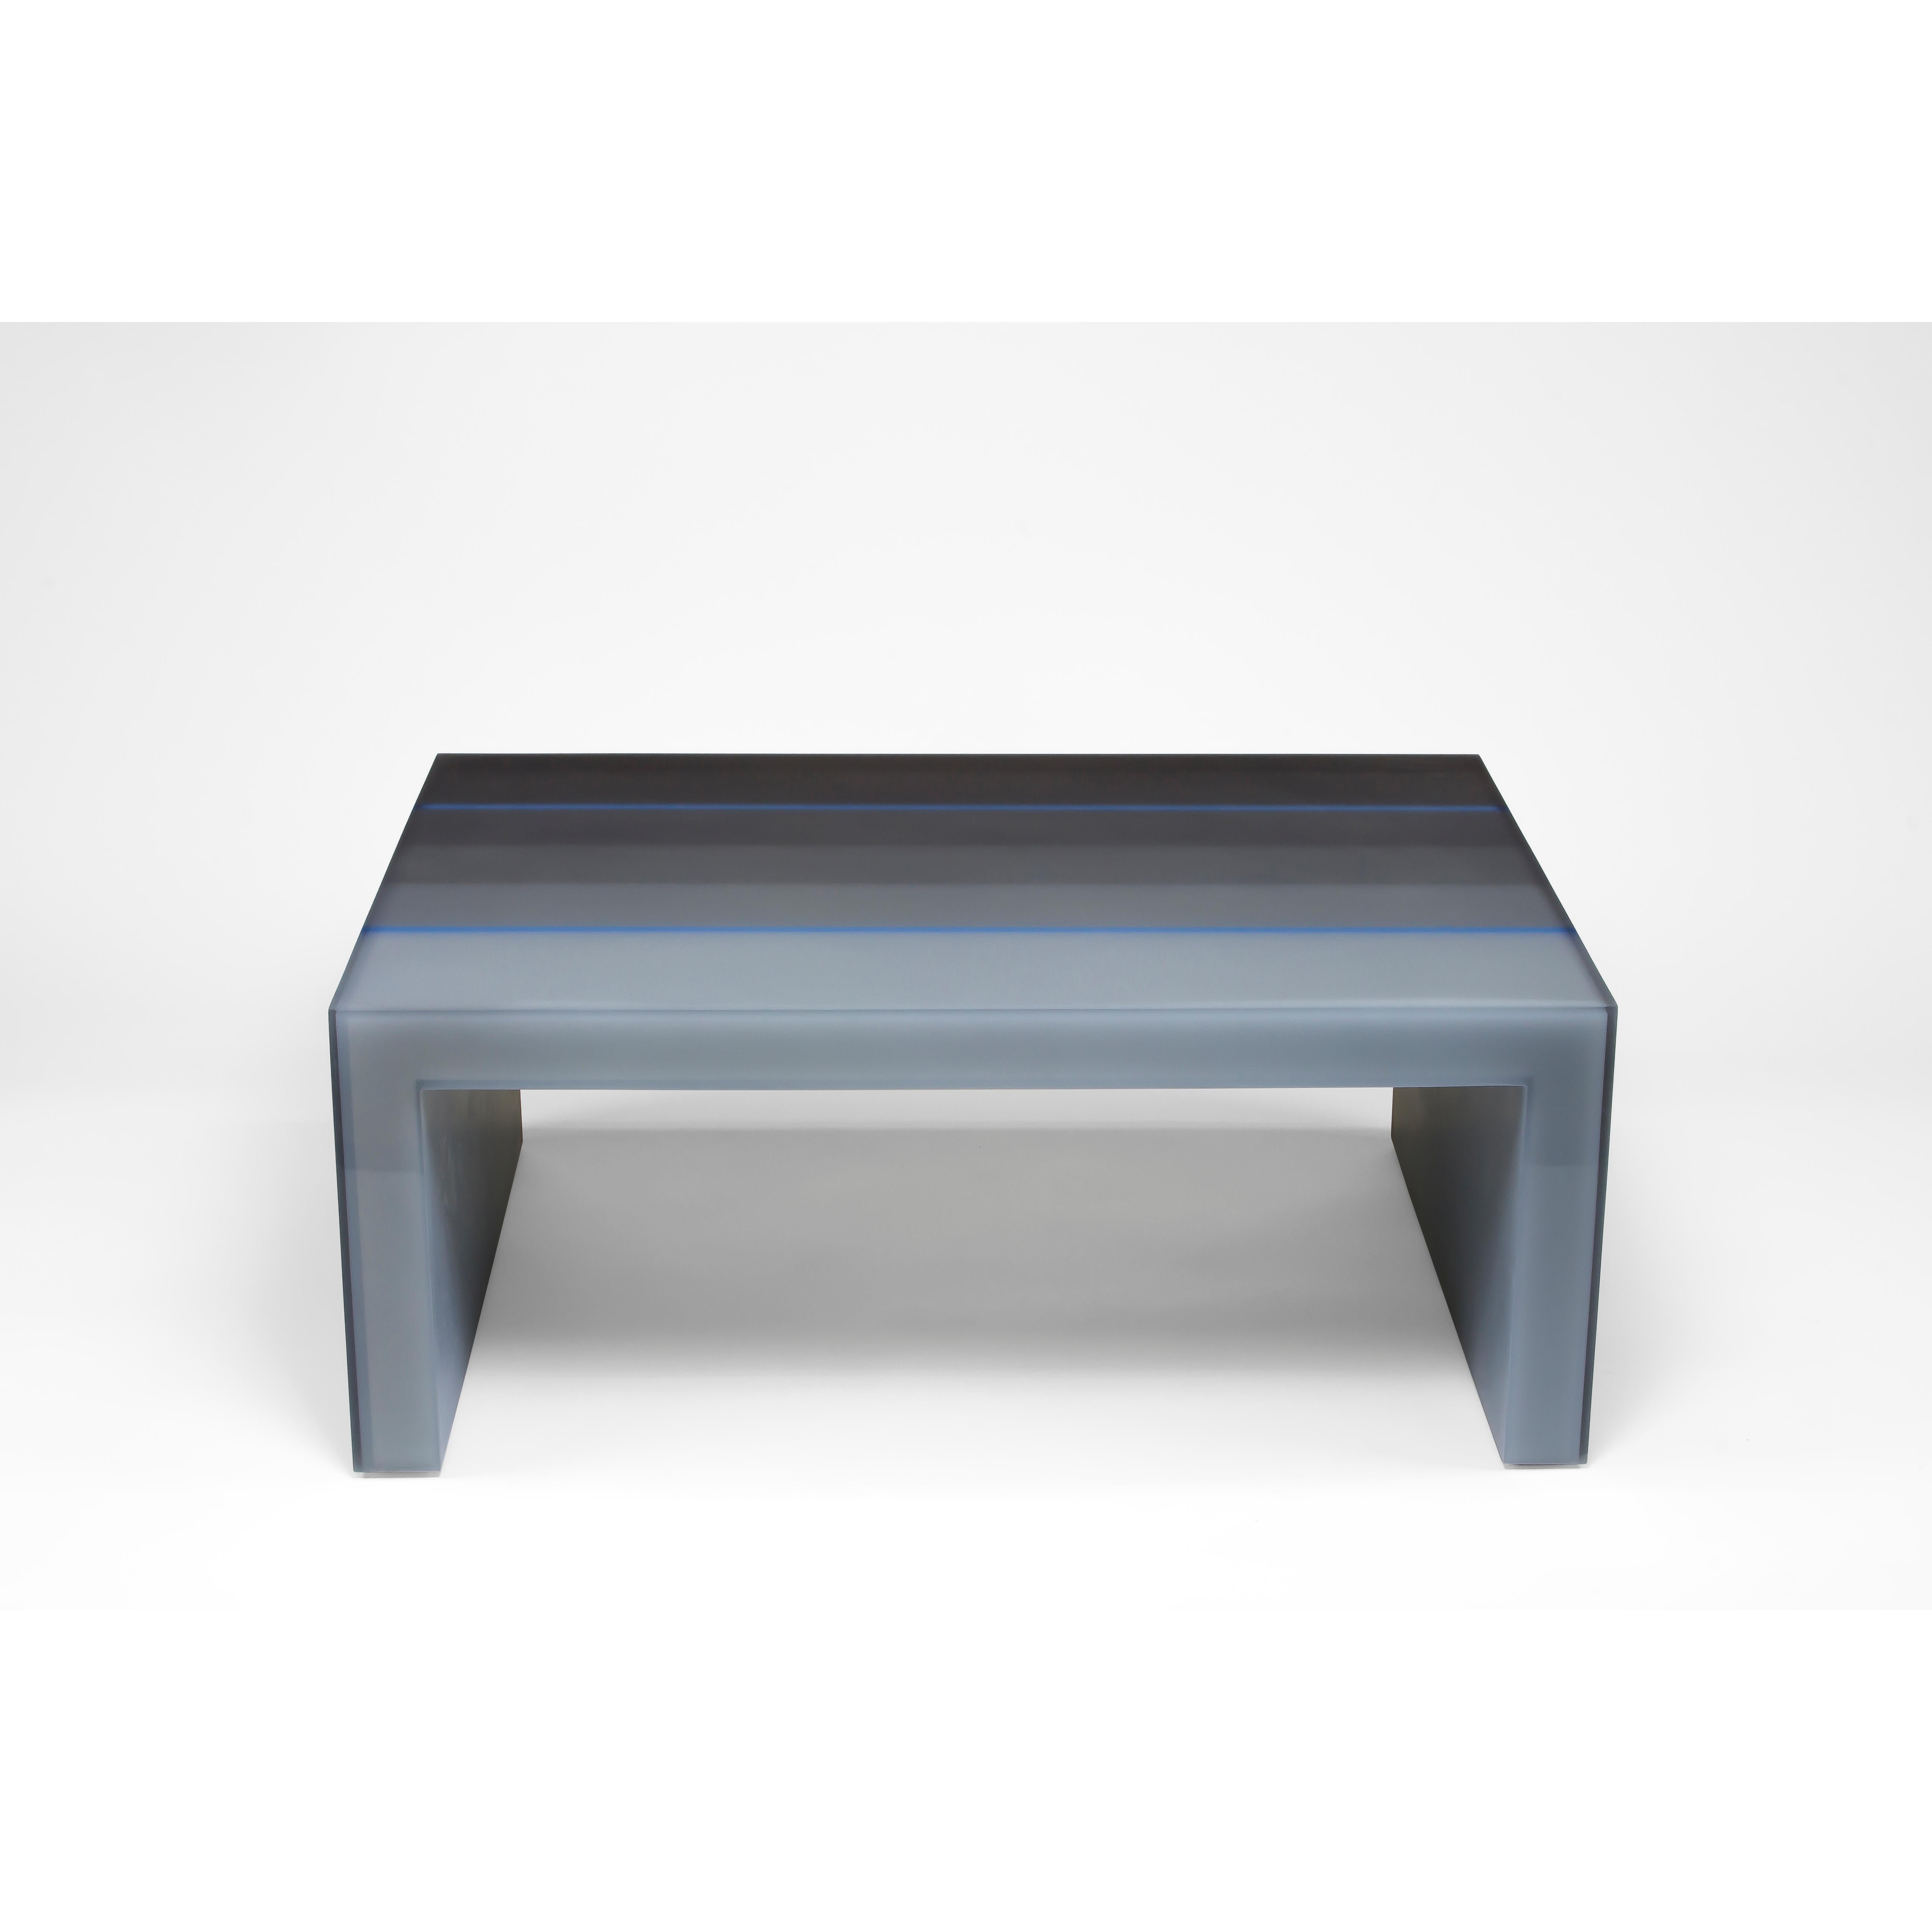 Gradient Resin Coffee Table/Side Table in Gray by Facture REP by Tuleste Factory In New Condition For Sale In New York, NY